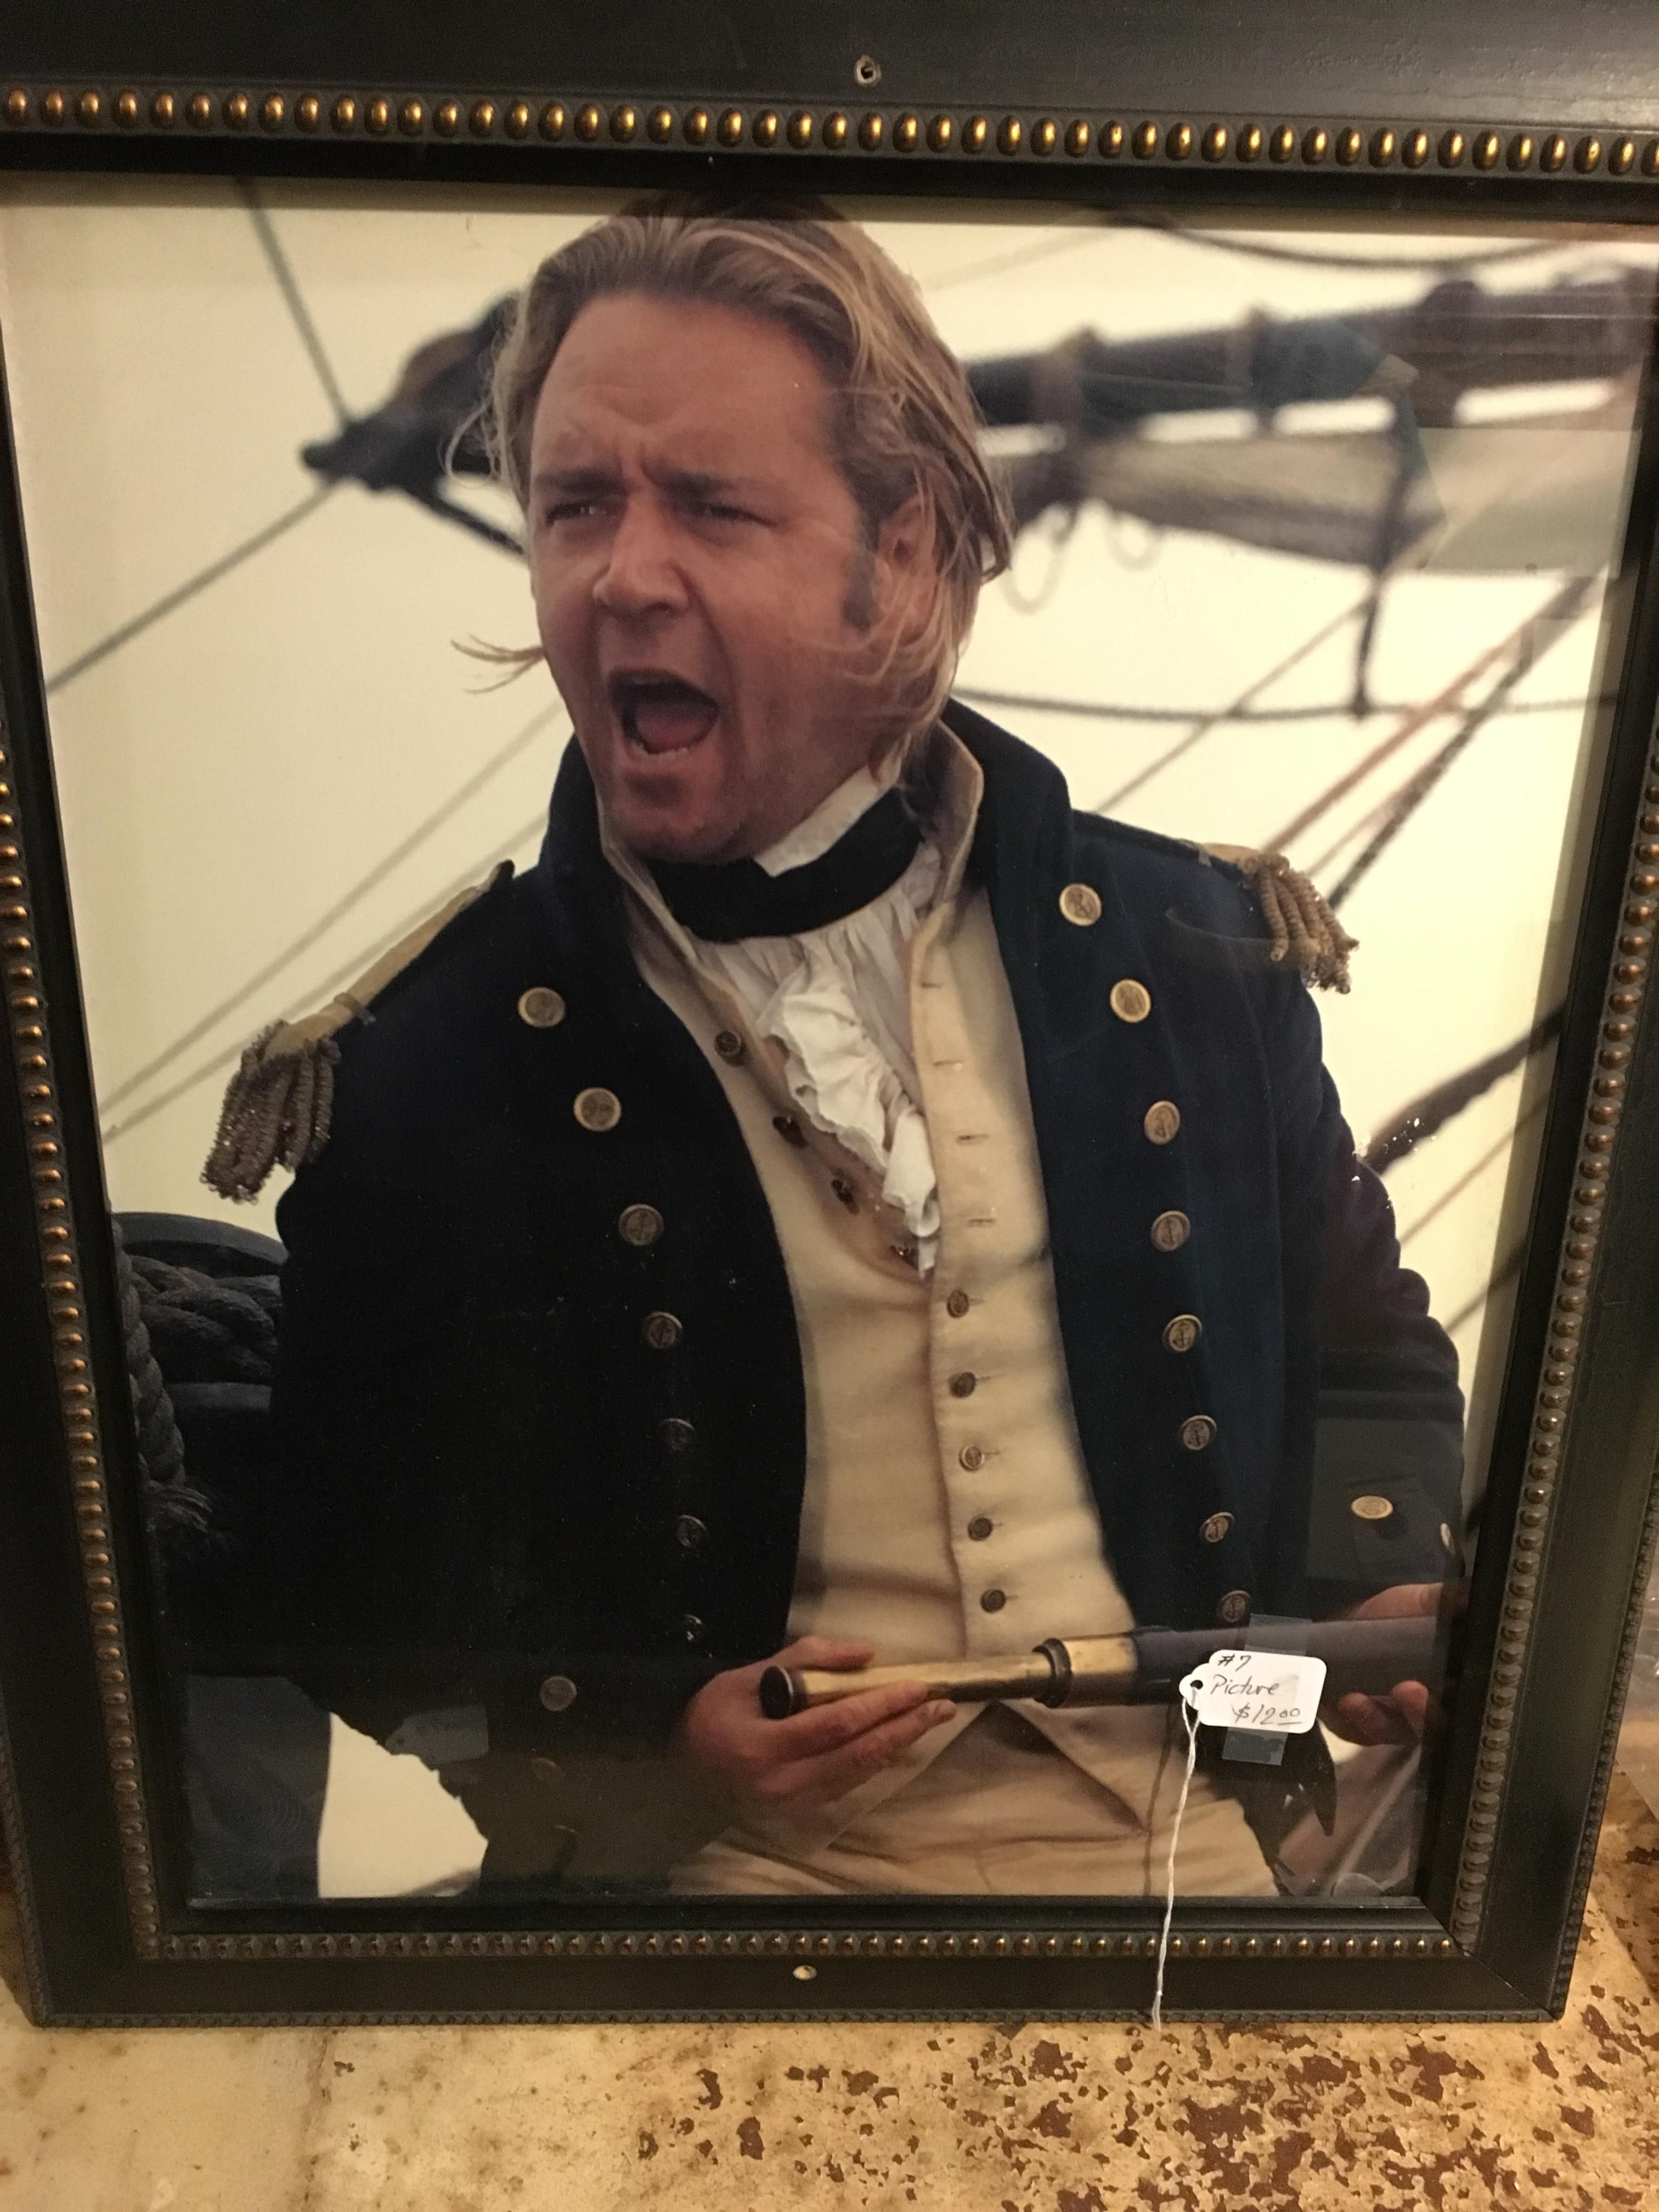 Found a framed picture of screaming Russell Crowe in an Amish antique store